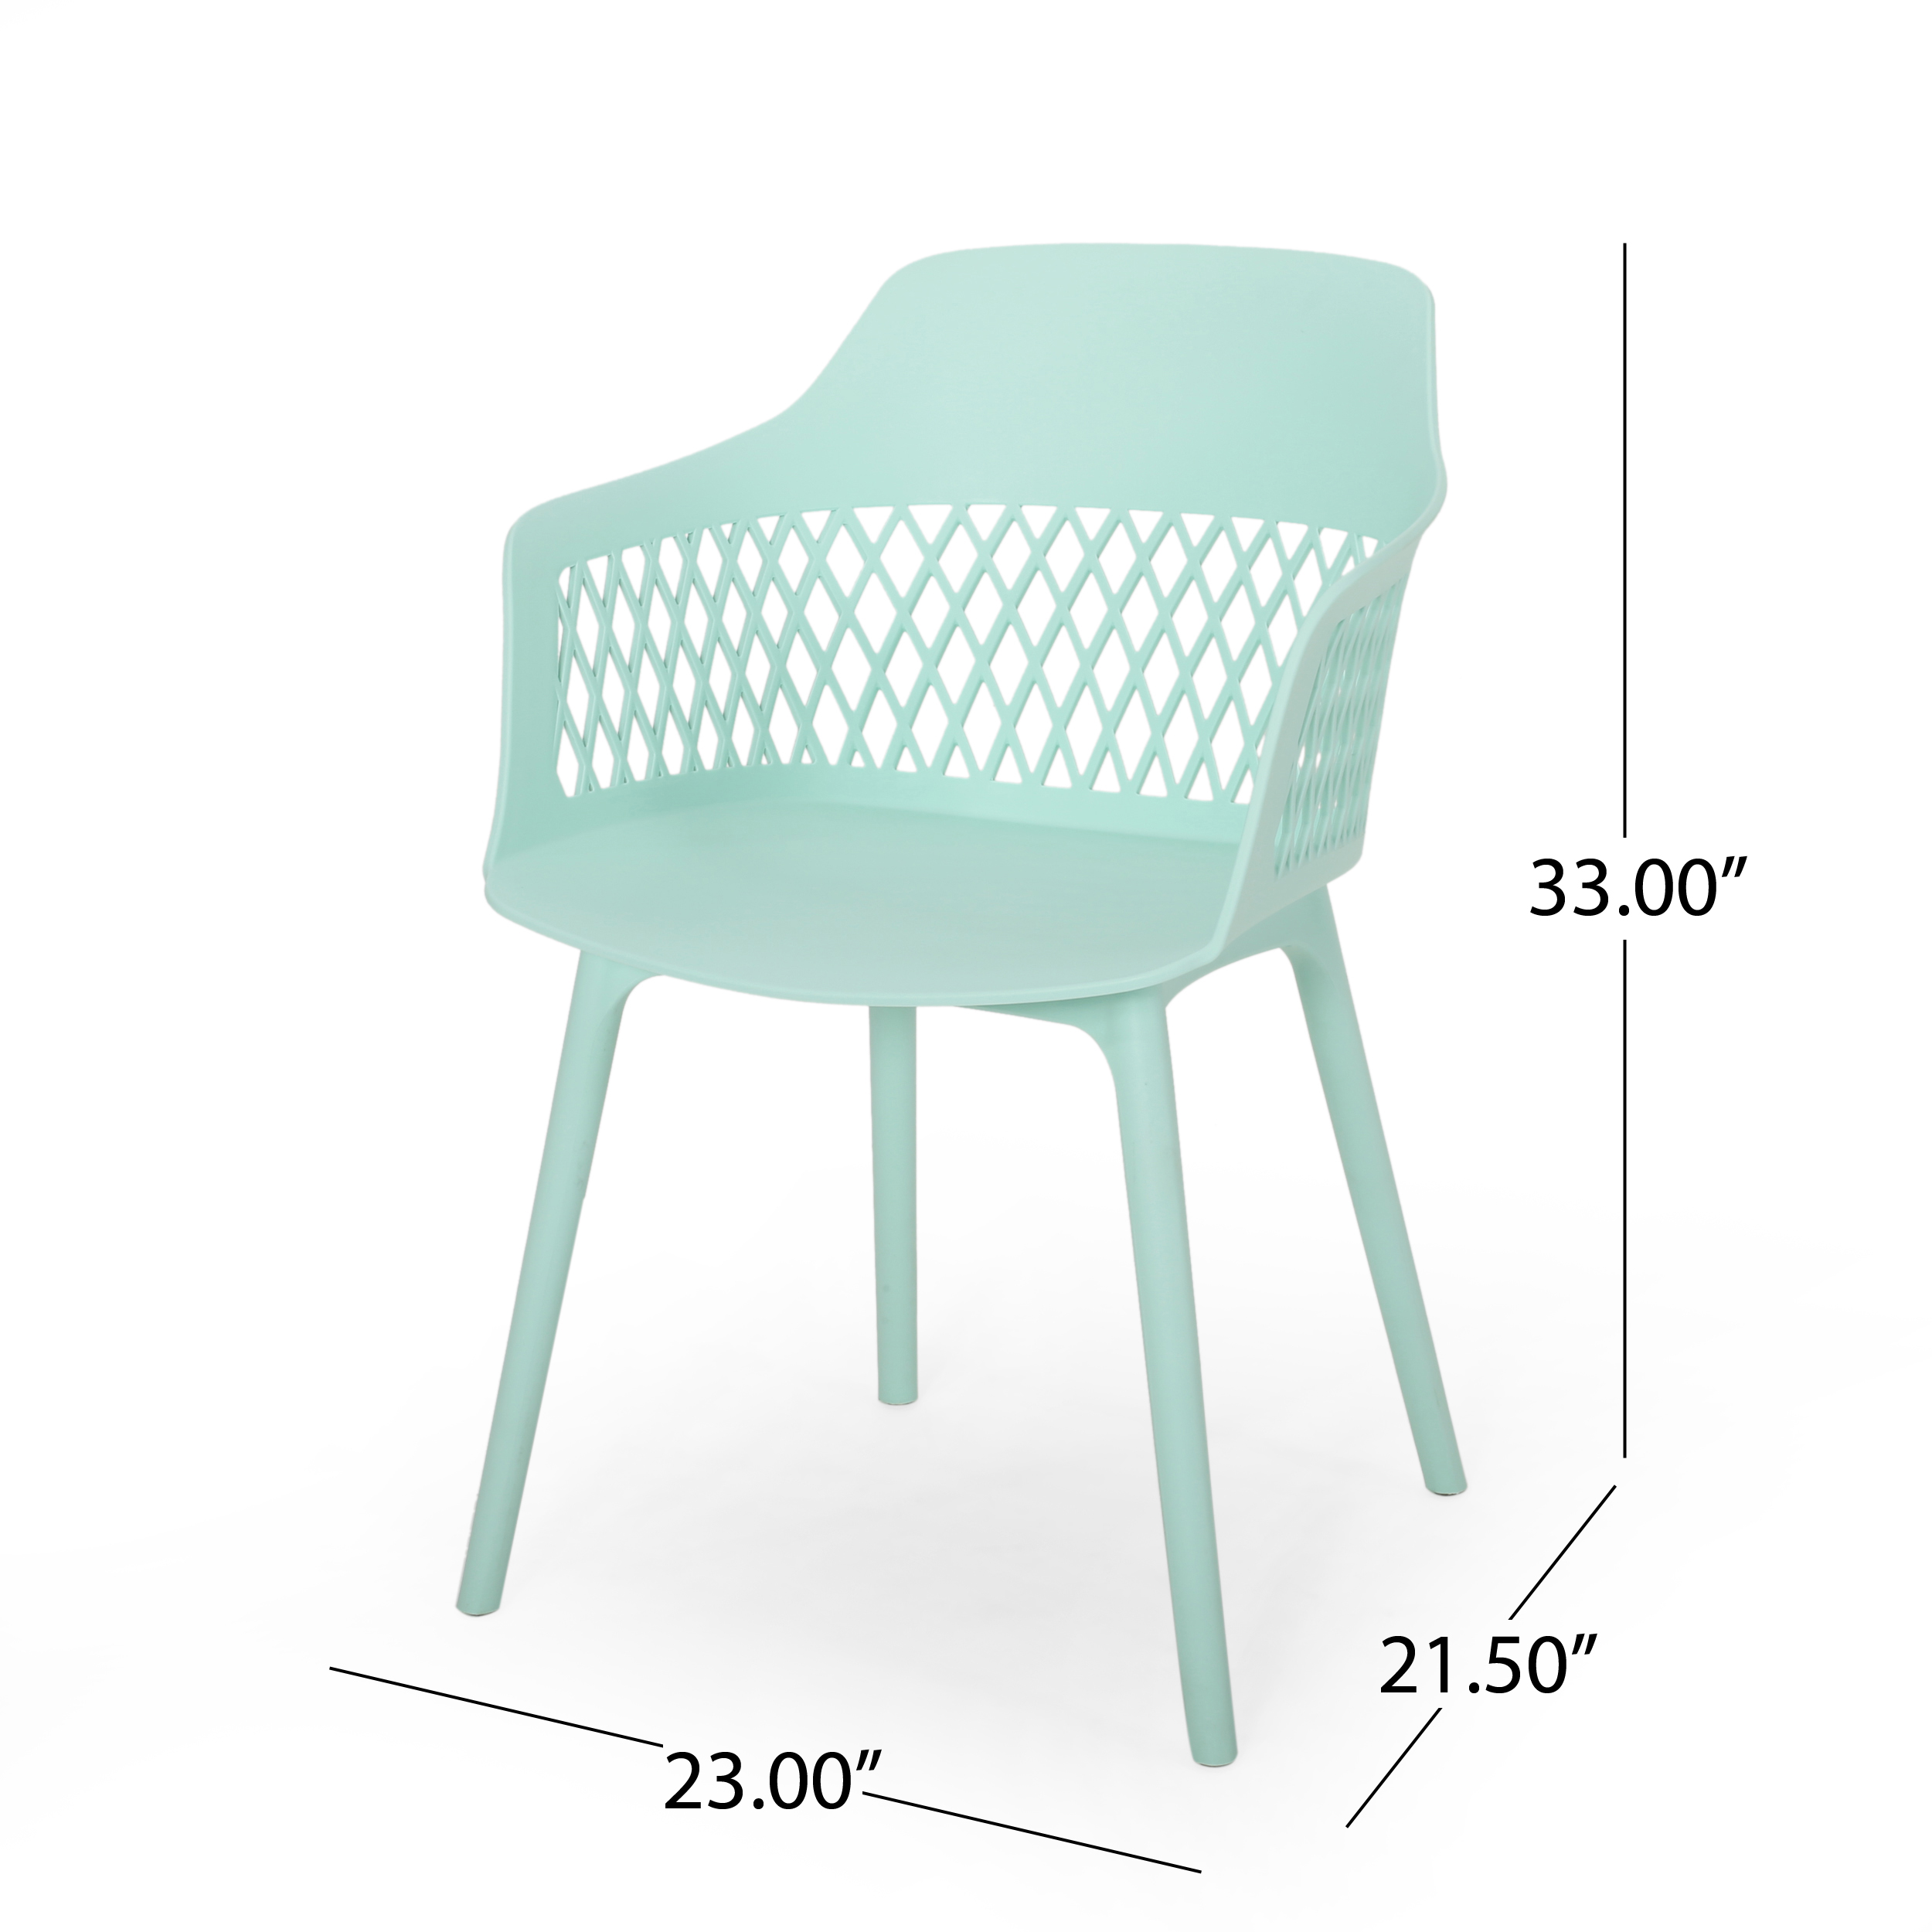 GDF Studio Airyanna Outdoor Modern Dining Chair, Set of 4, Mint - image 3 of 7